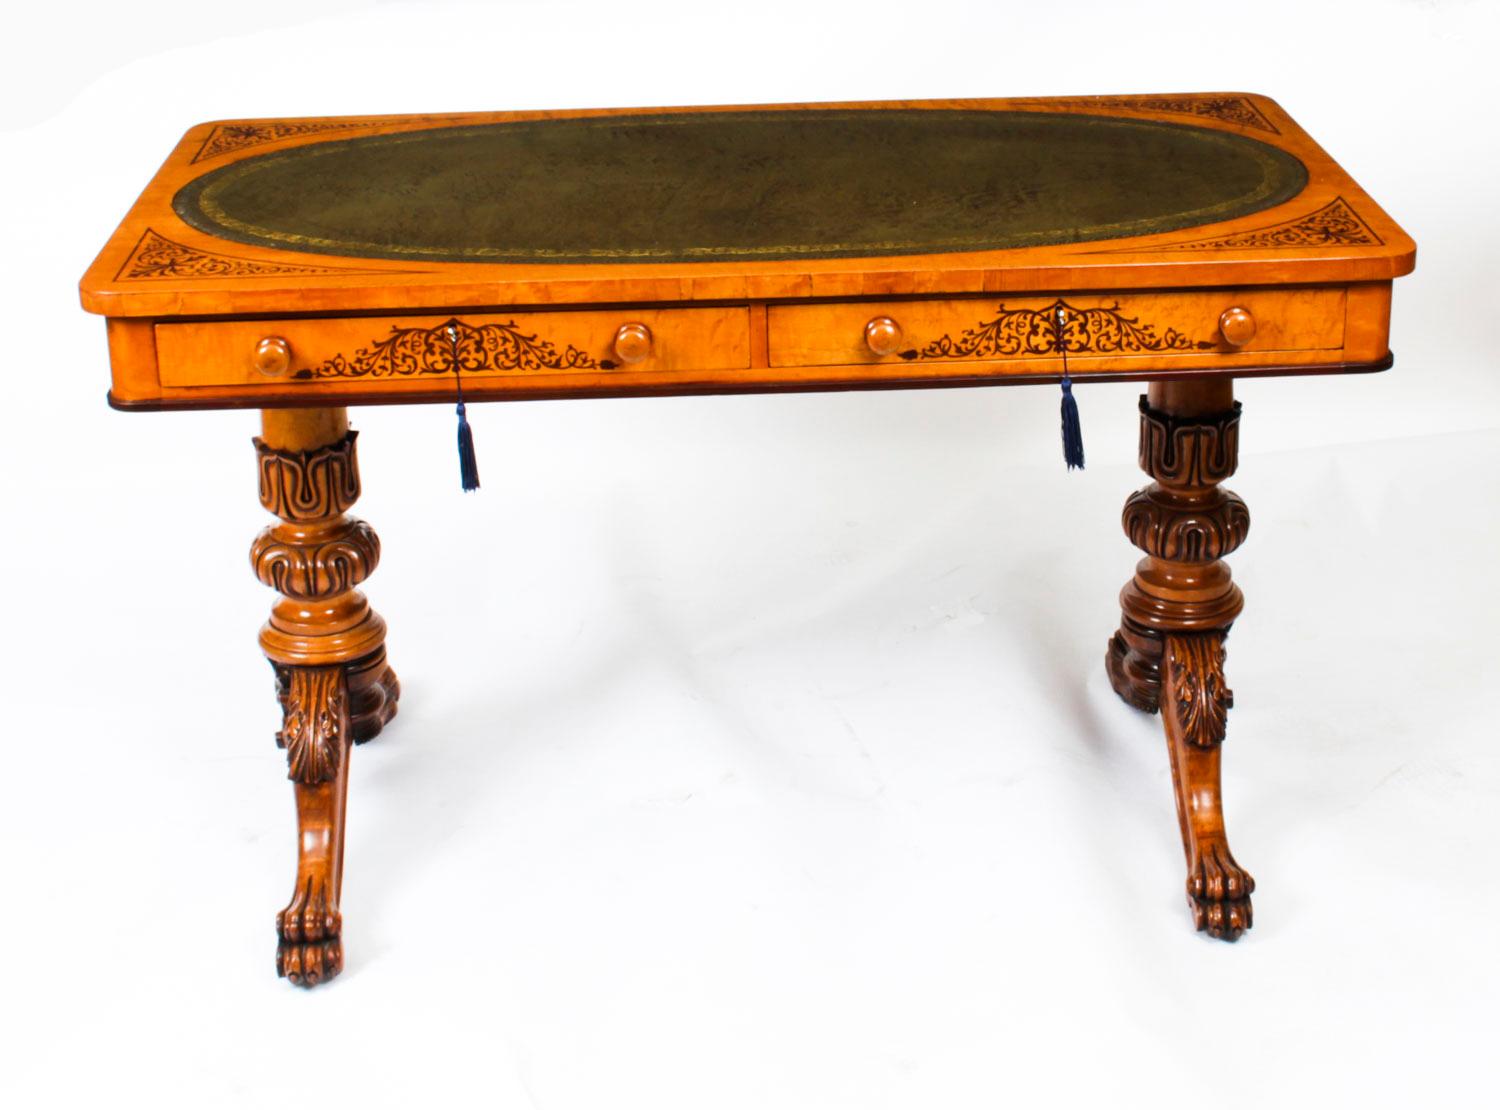 This is a fine antique early Victorian satinwood Marquetry writing table in the manner of Gillows and circa 1840 in date.
 
The rectangular shaped top features a central inset oval tooled olive green leather writing surface with decorative